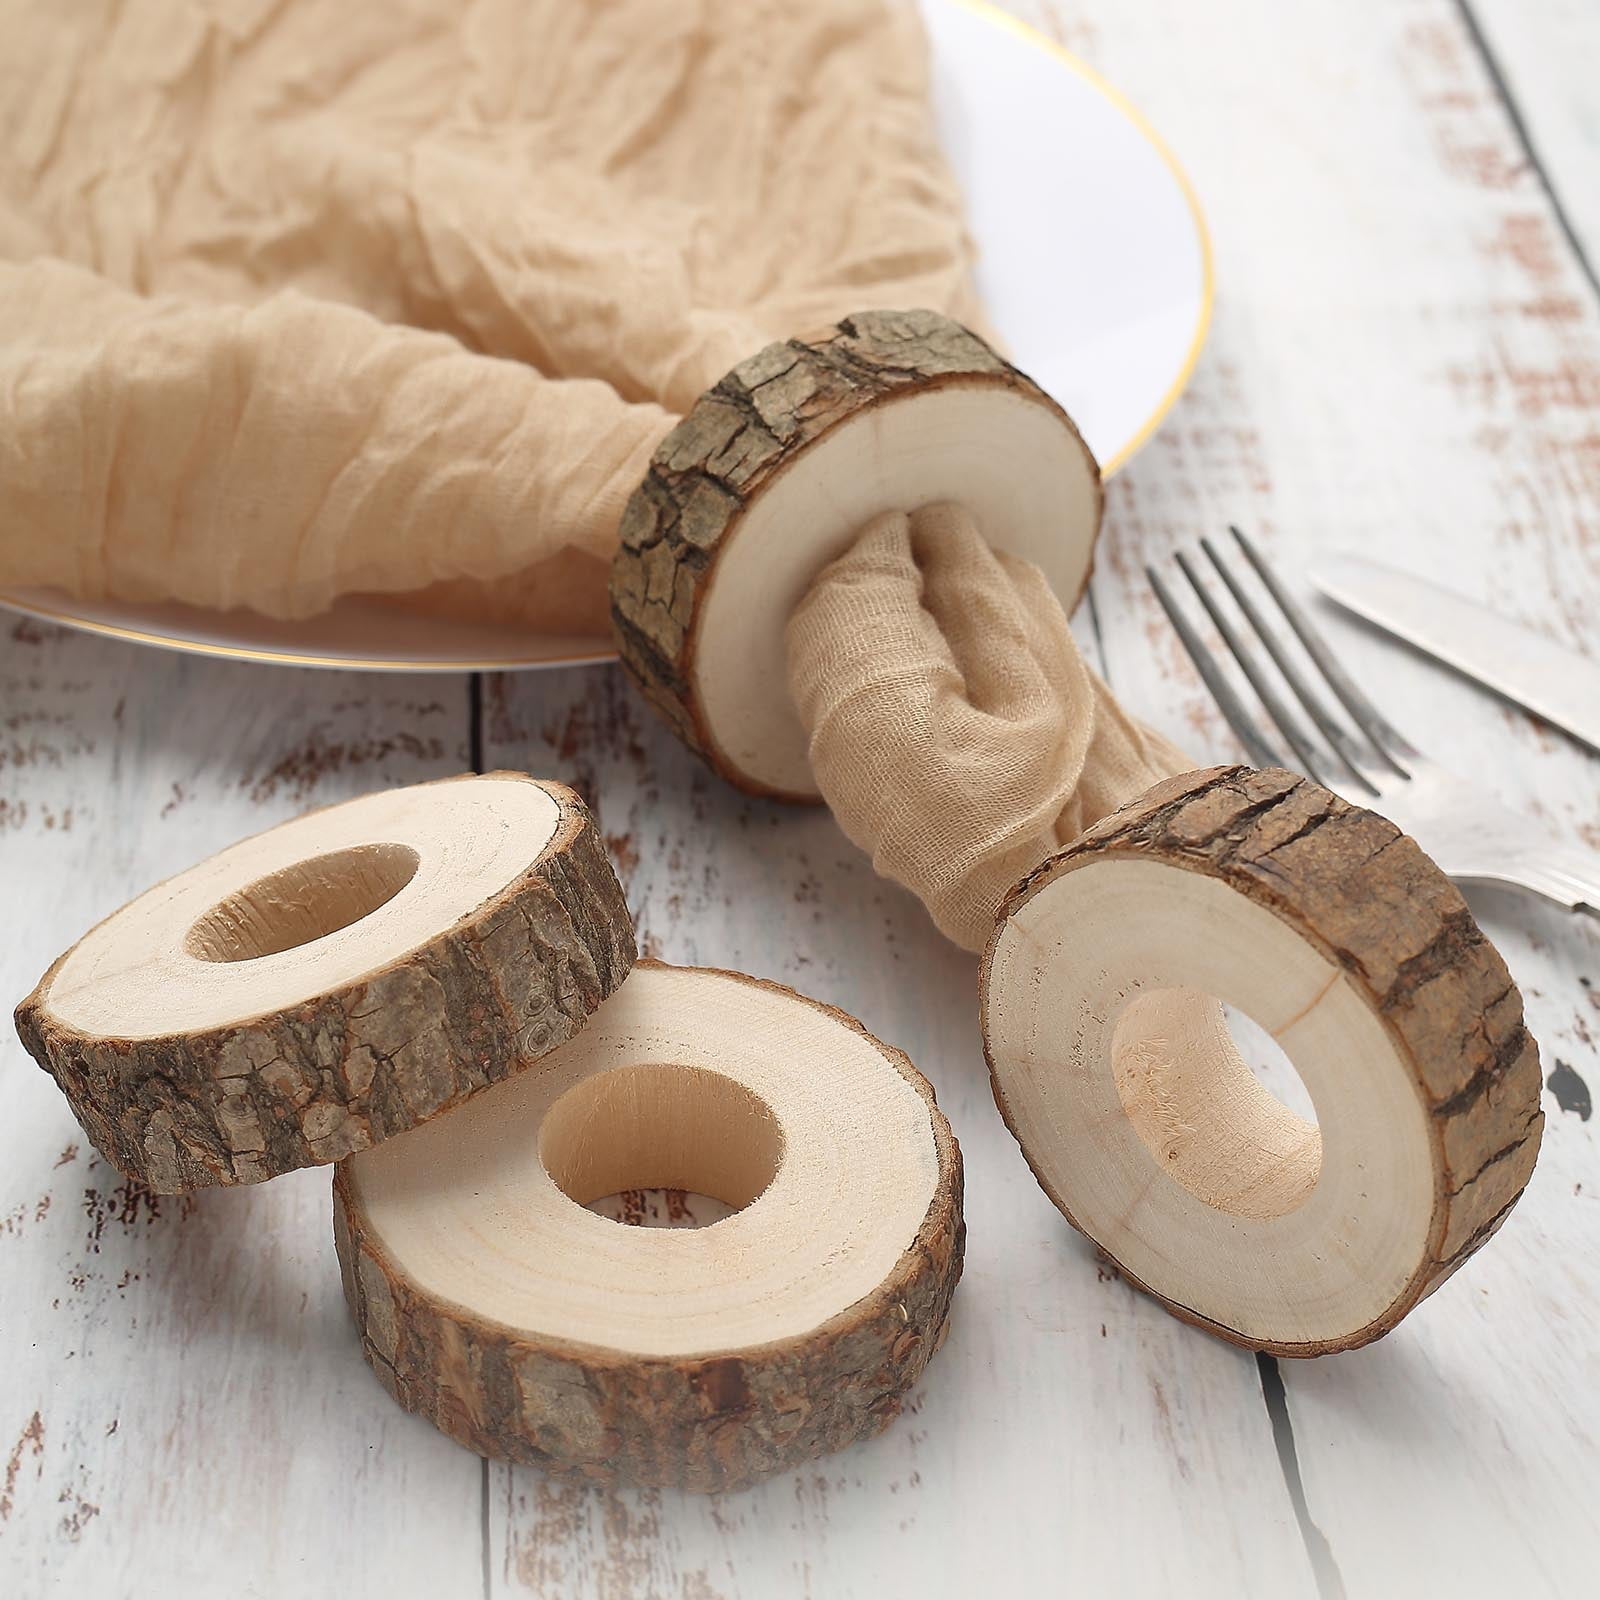 Balsacircle 4 Natural Rustic Unfinished Wood Napkin Rings Wedding Party Catering Restaurant Kitchen Tableware Compostable, Size: 1.75, Brown